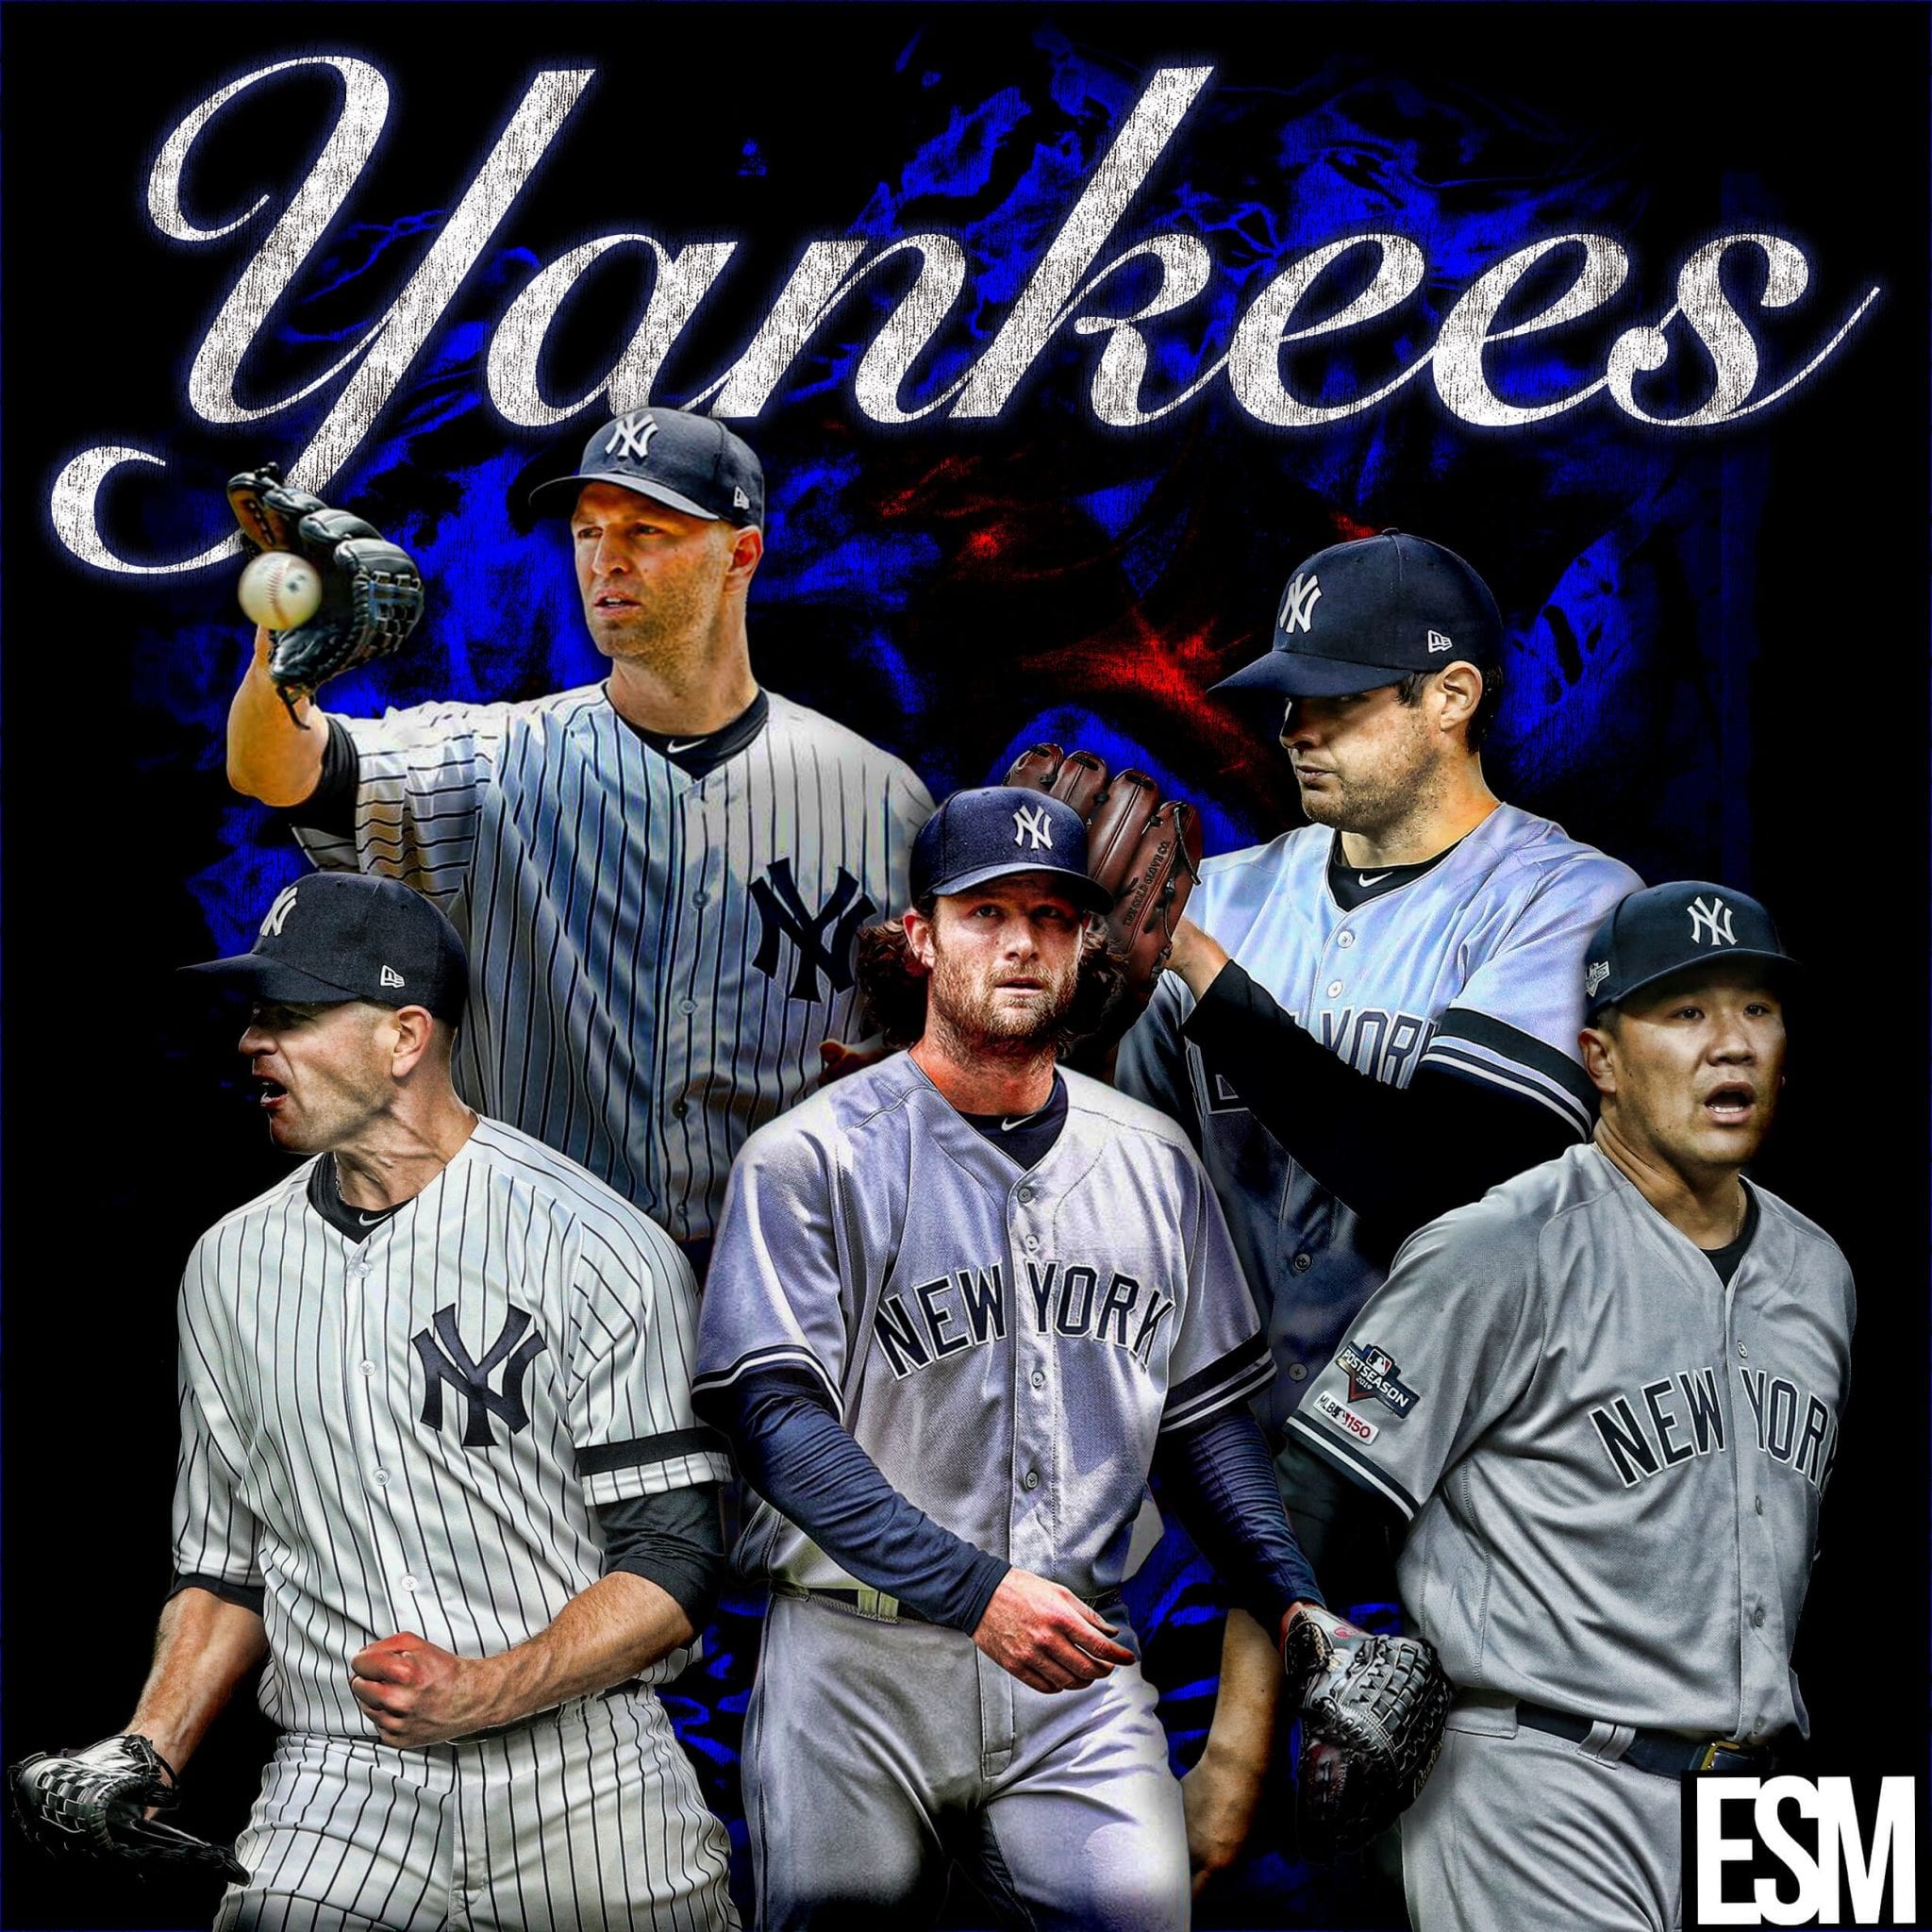 New York Yankees The Yankee Empire strikes back, mission to number 28